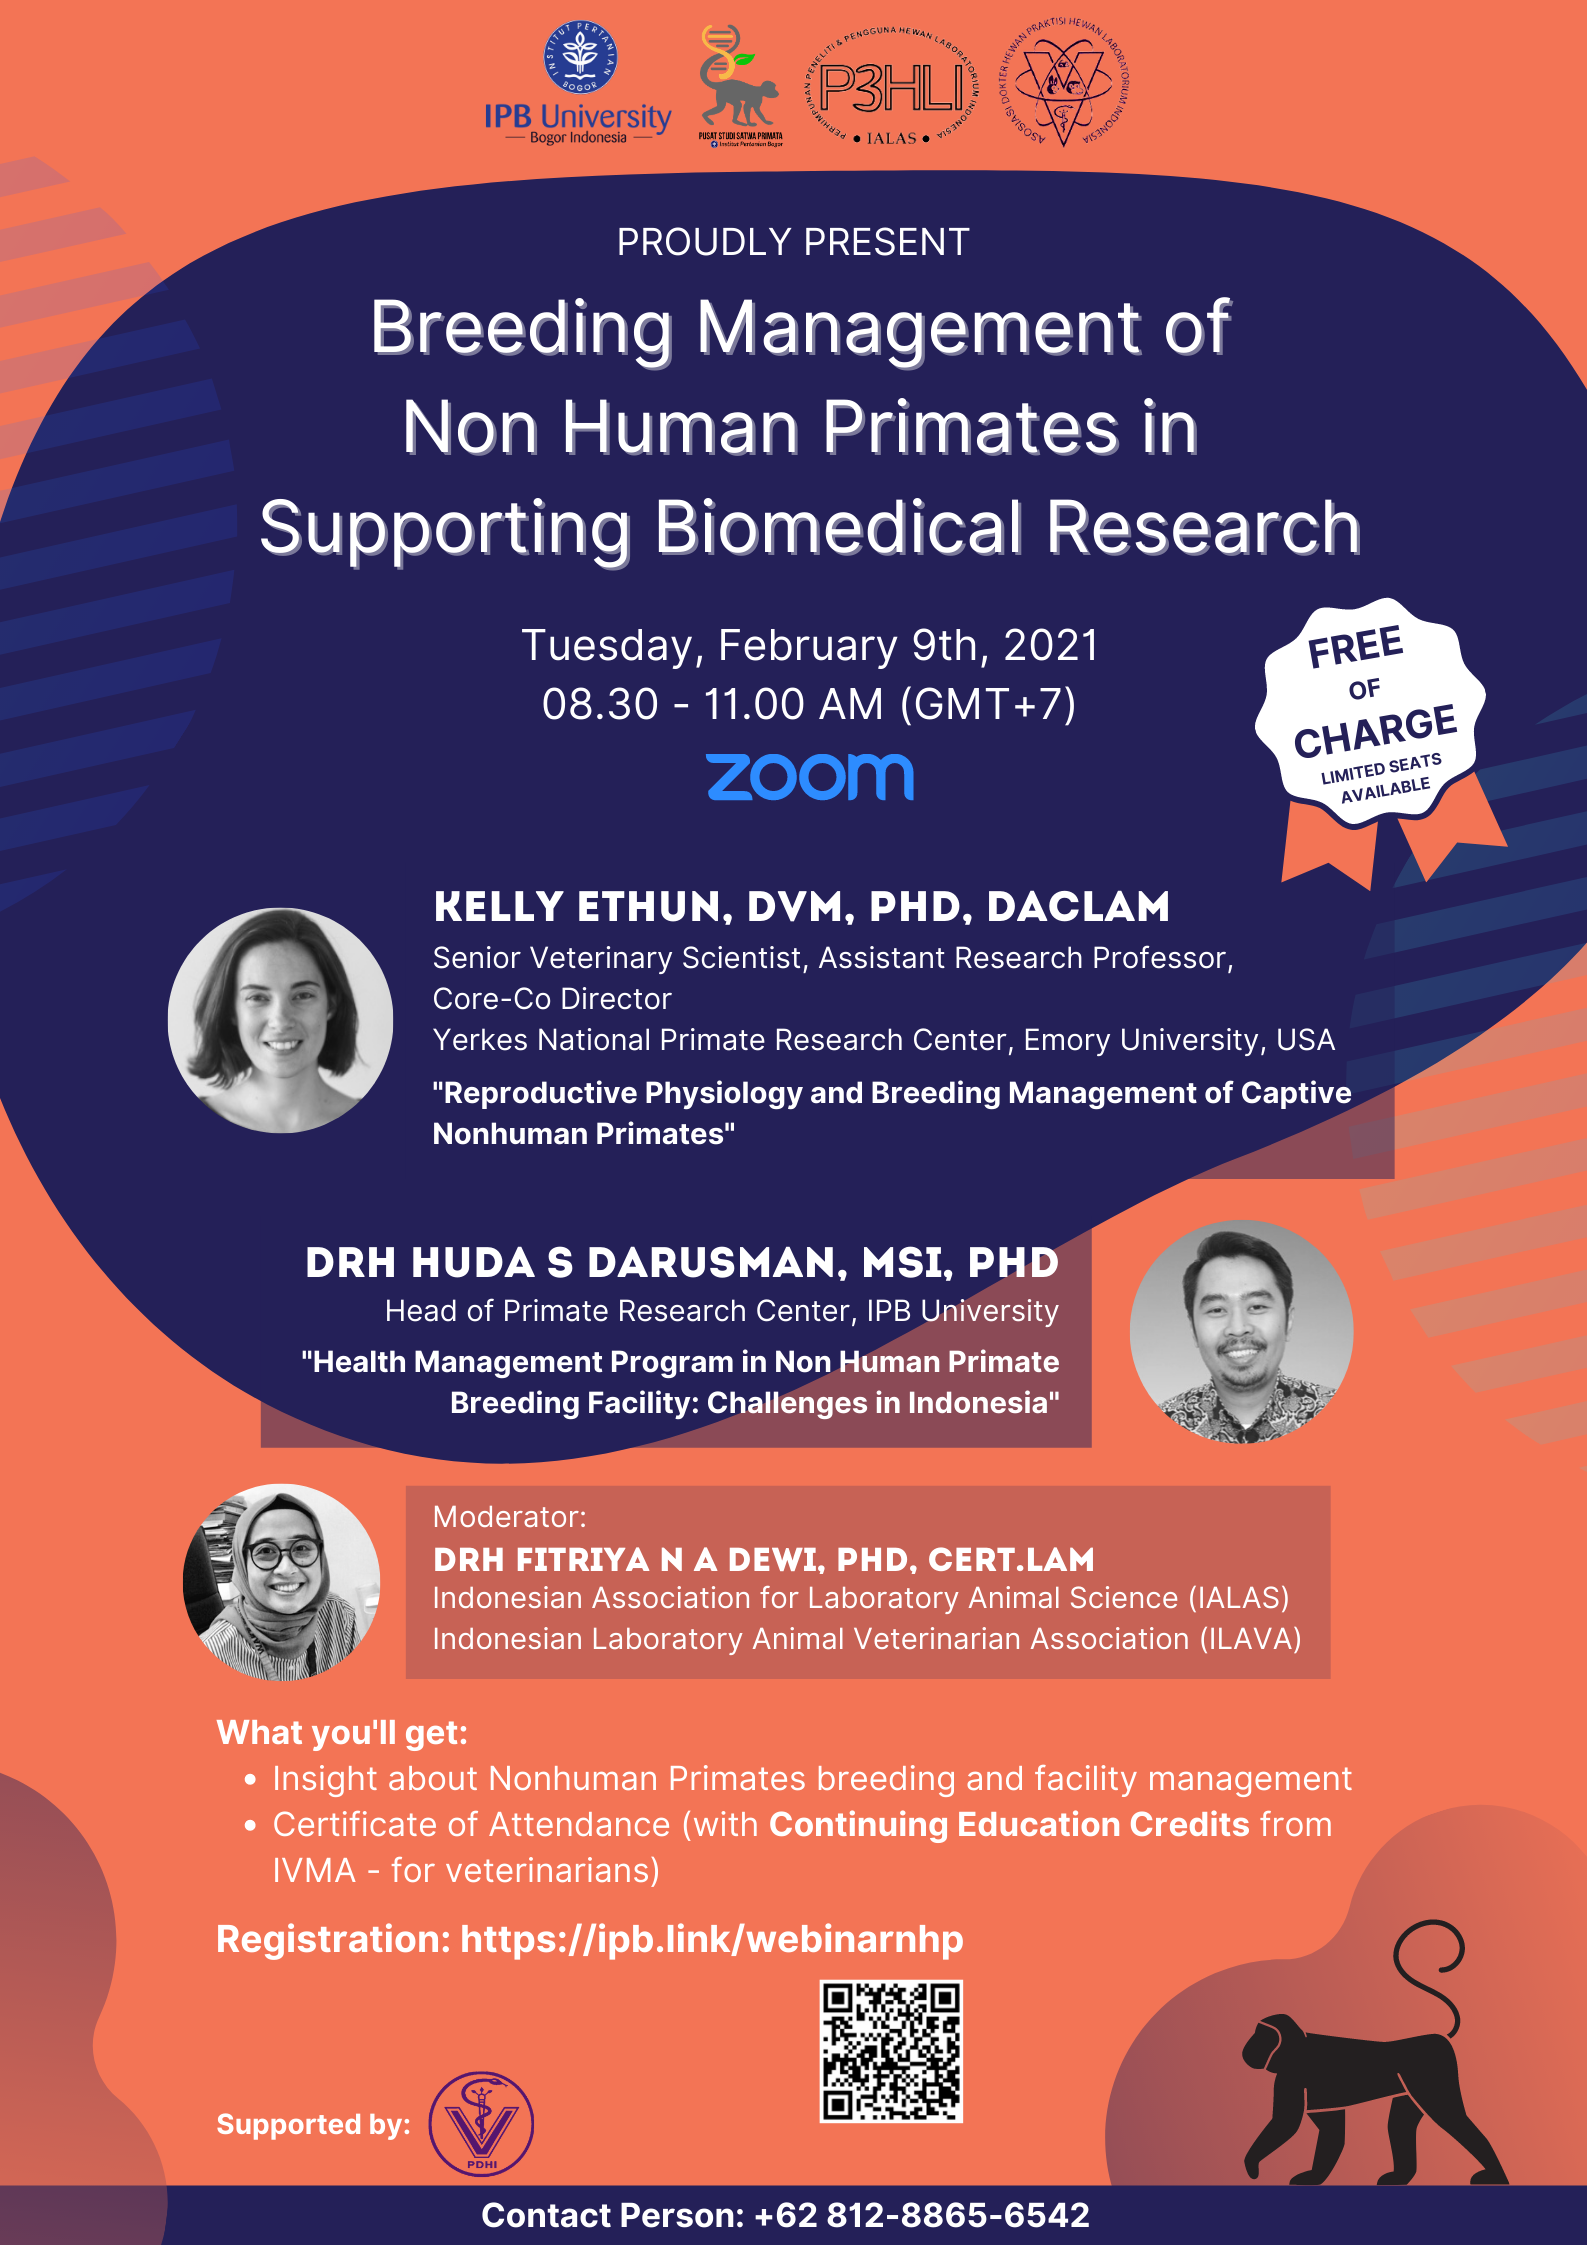 Breeding Management of Non Human Primates in Supporting Biomedical Research Webinar